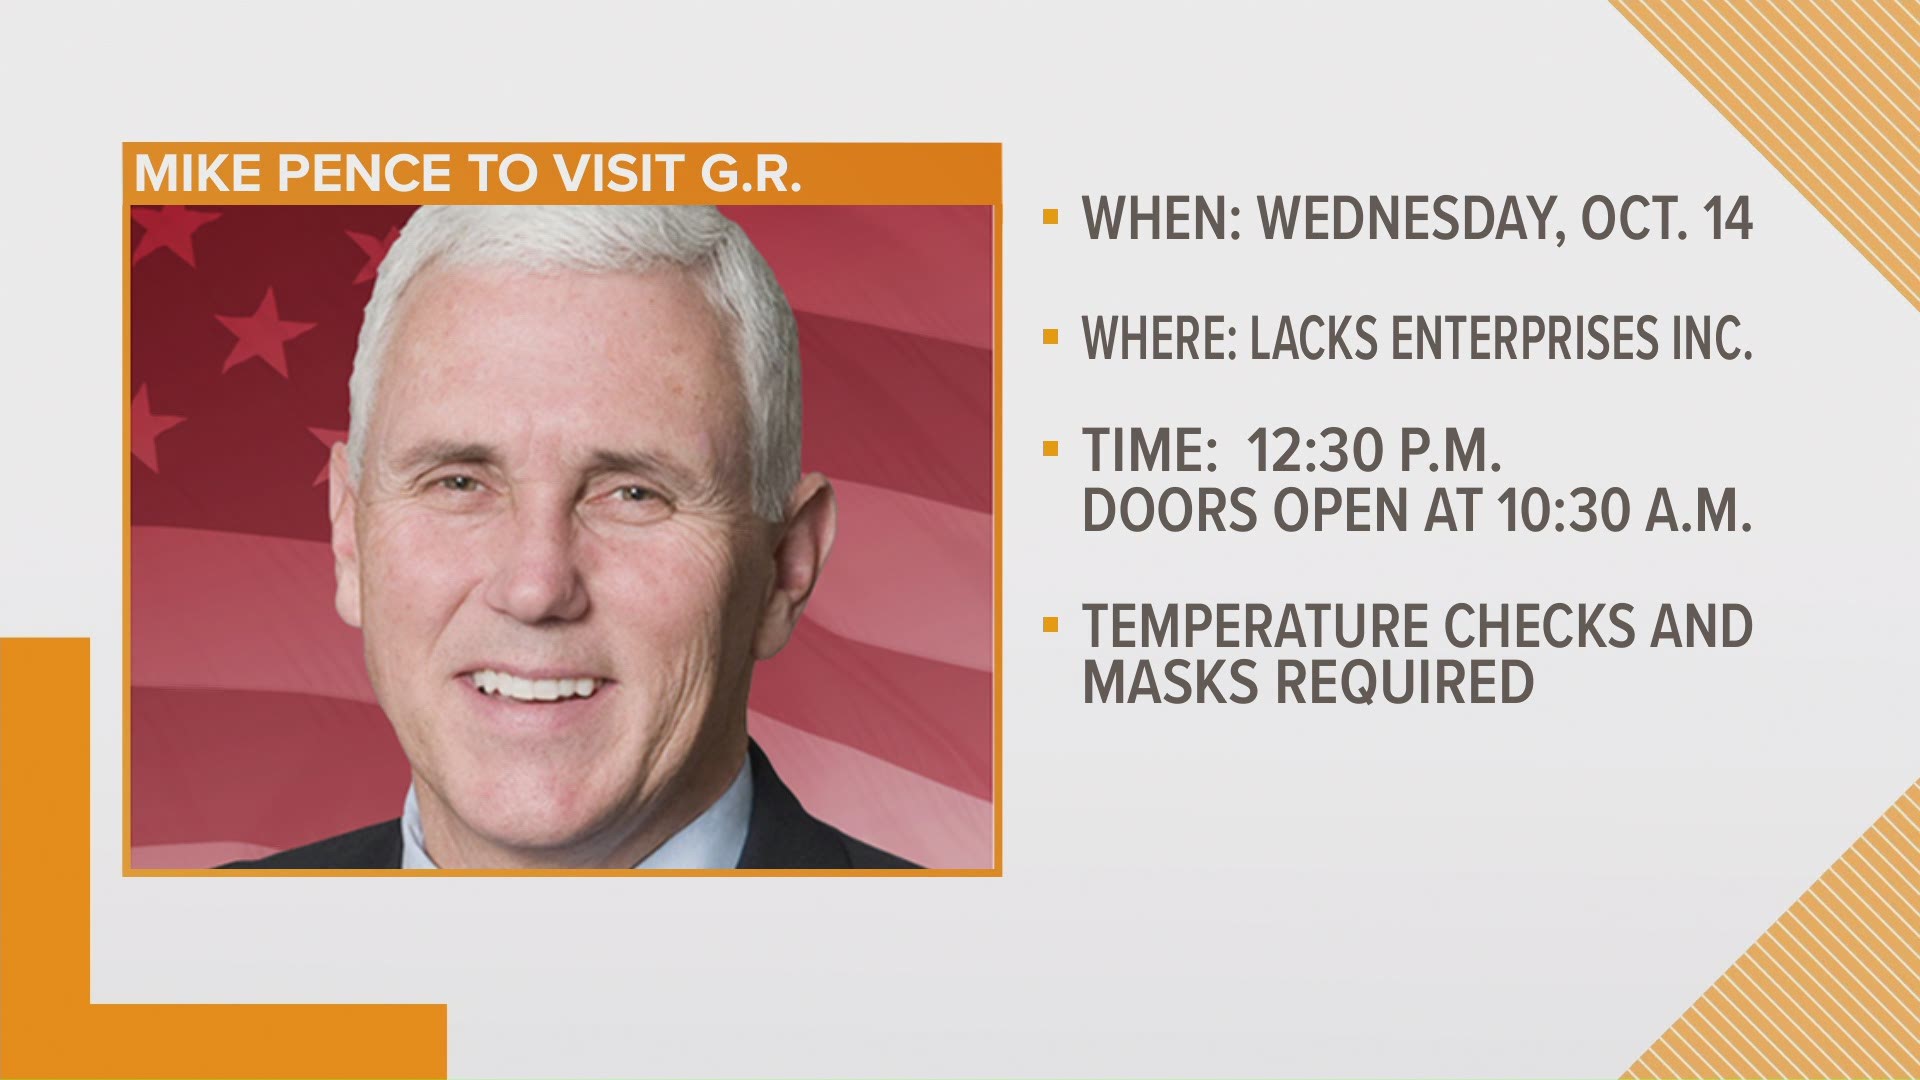 Vice President Mike Pence will be visiting Grand Rapids Wednesday, Oct. 14 for a “Make America Great Again” event.